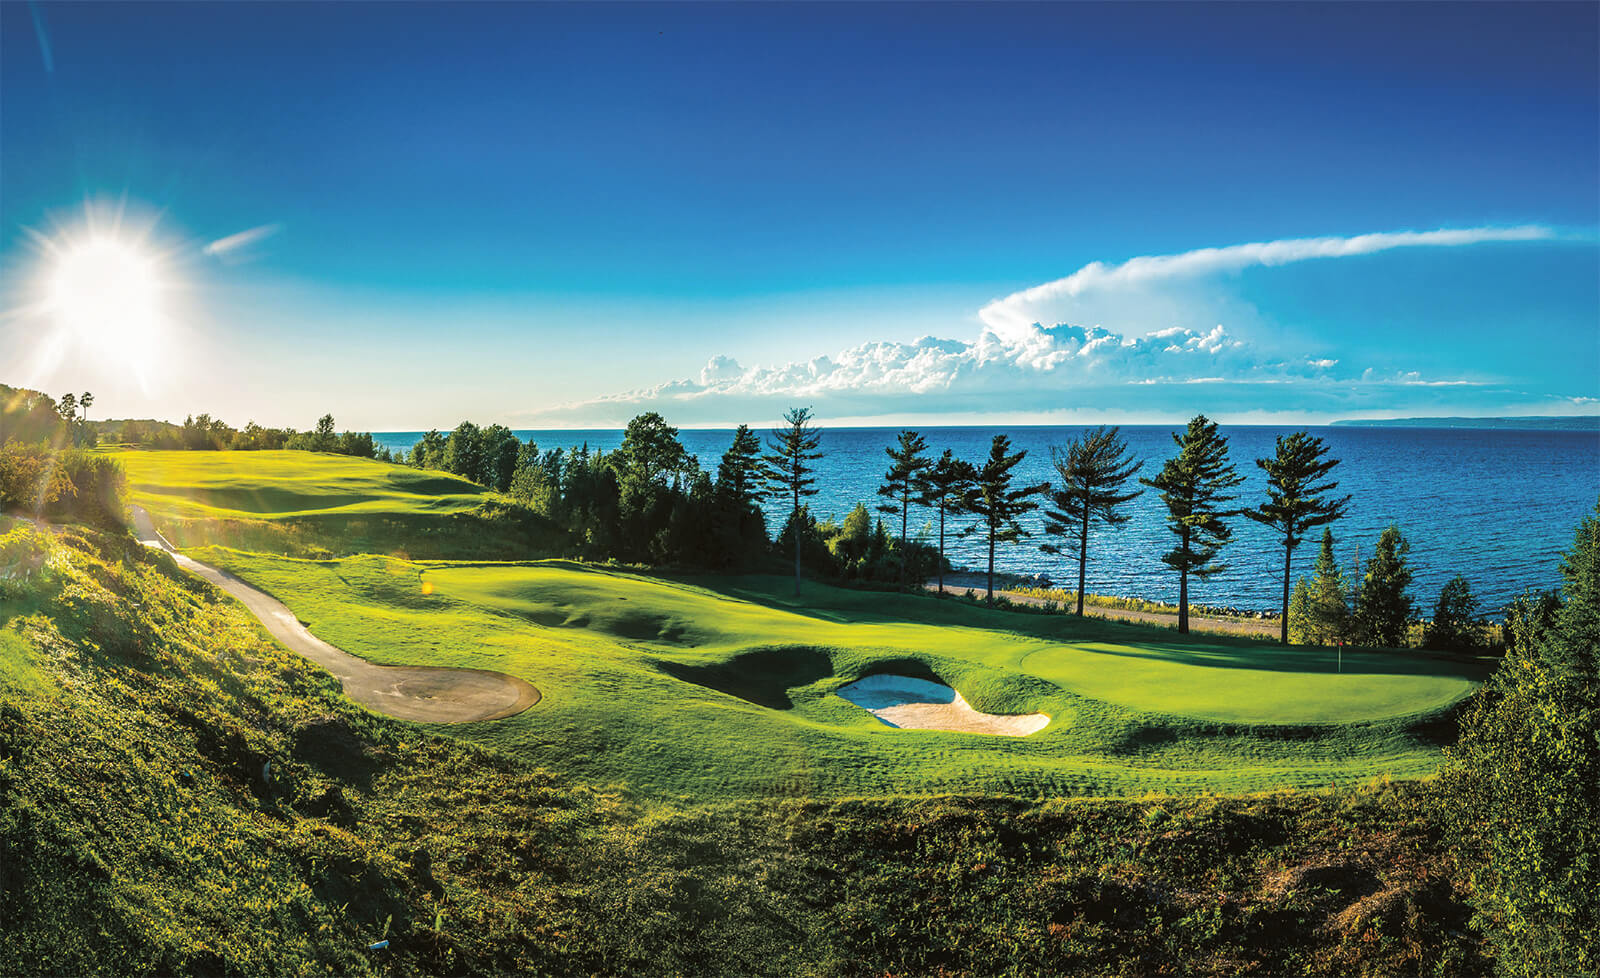 The World’s Best Rated Golf Course